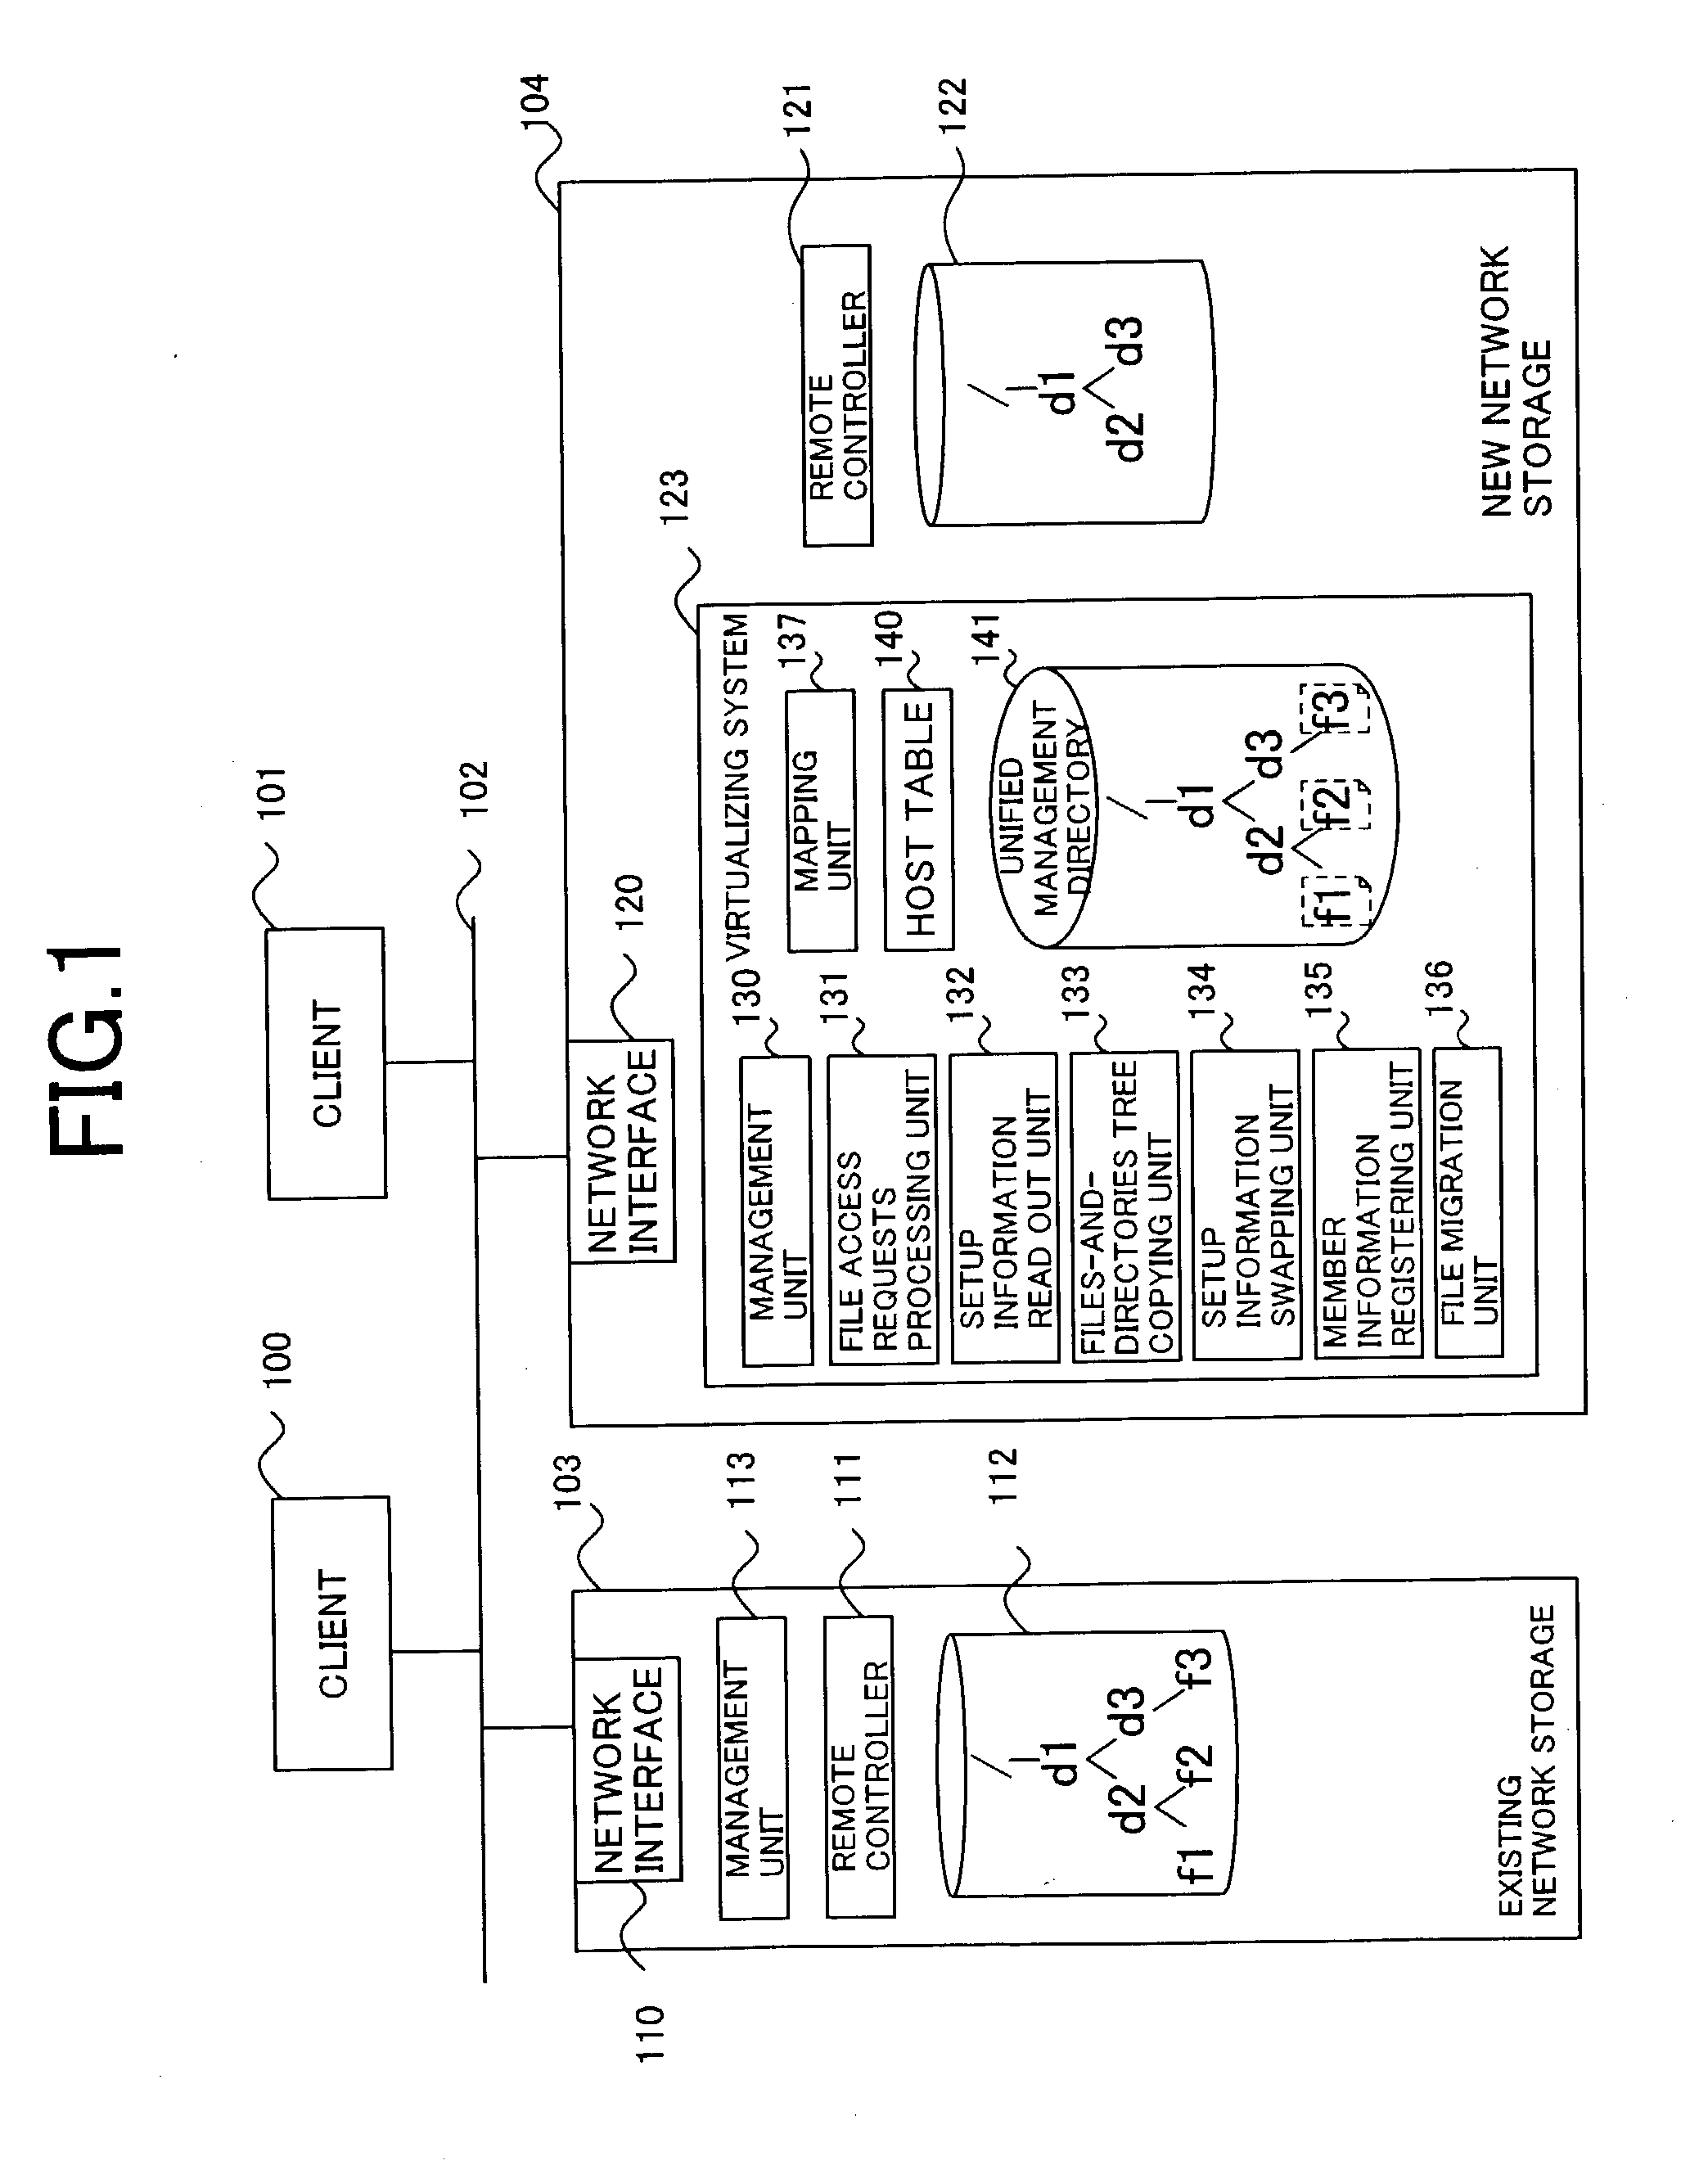 System and method for virtualizing network storages into a single file system view